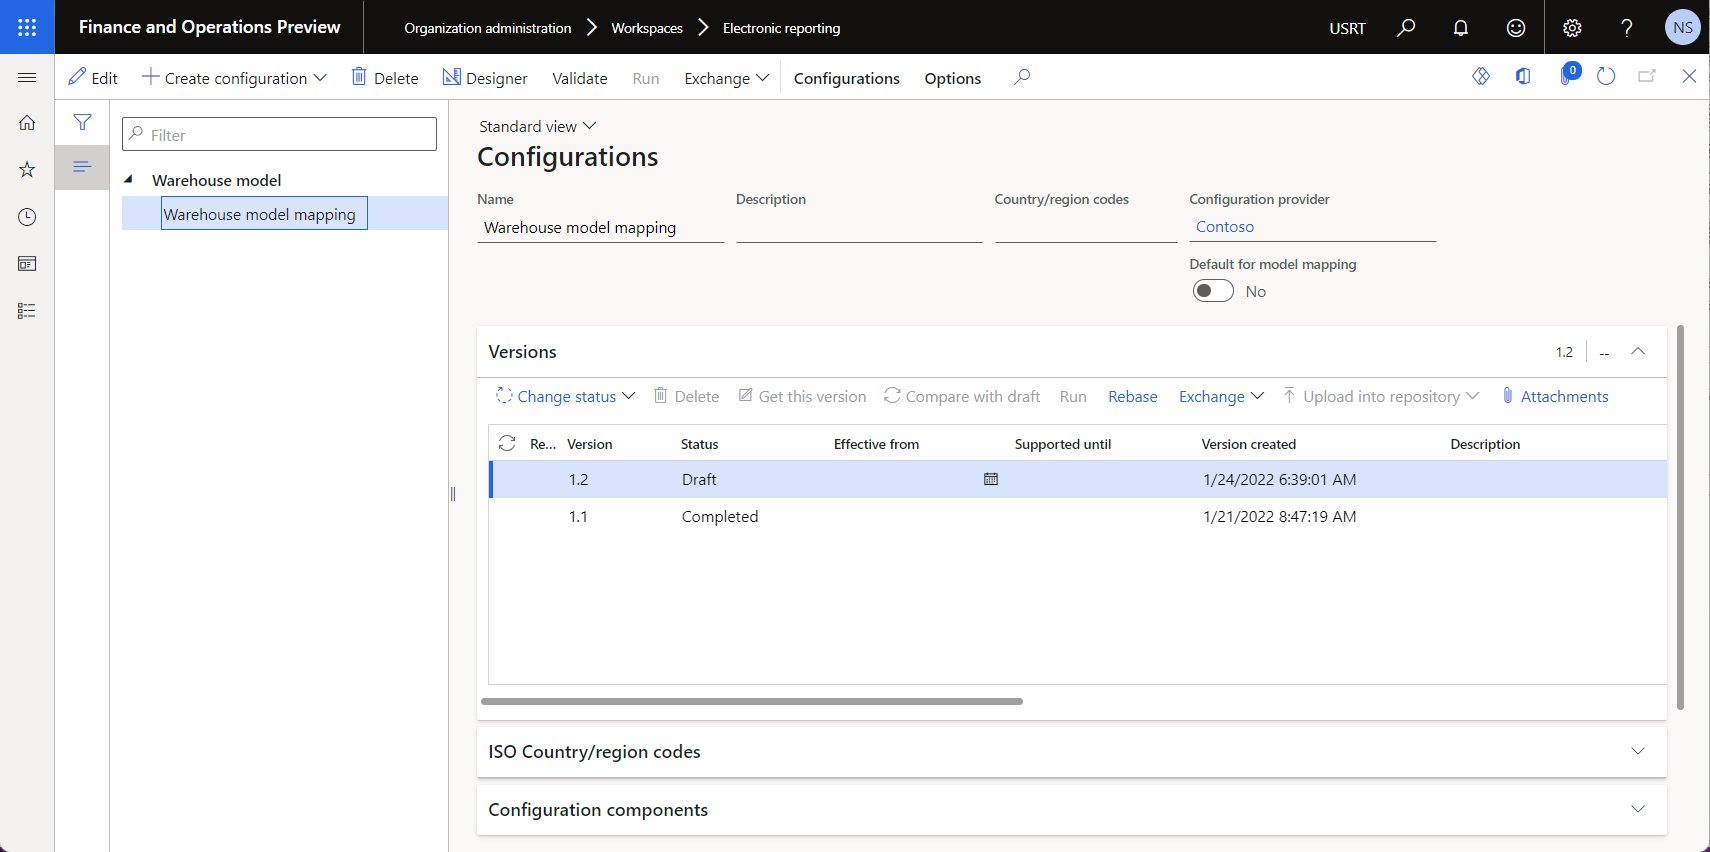 Imported ER model mapping configuration on the Configurations page.